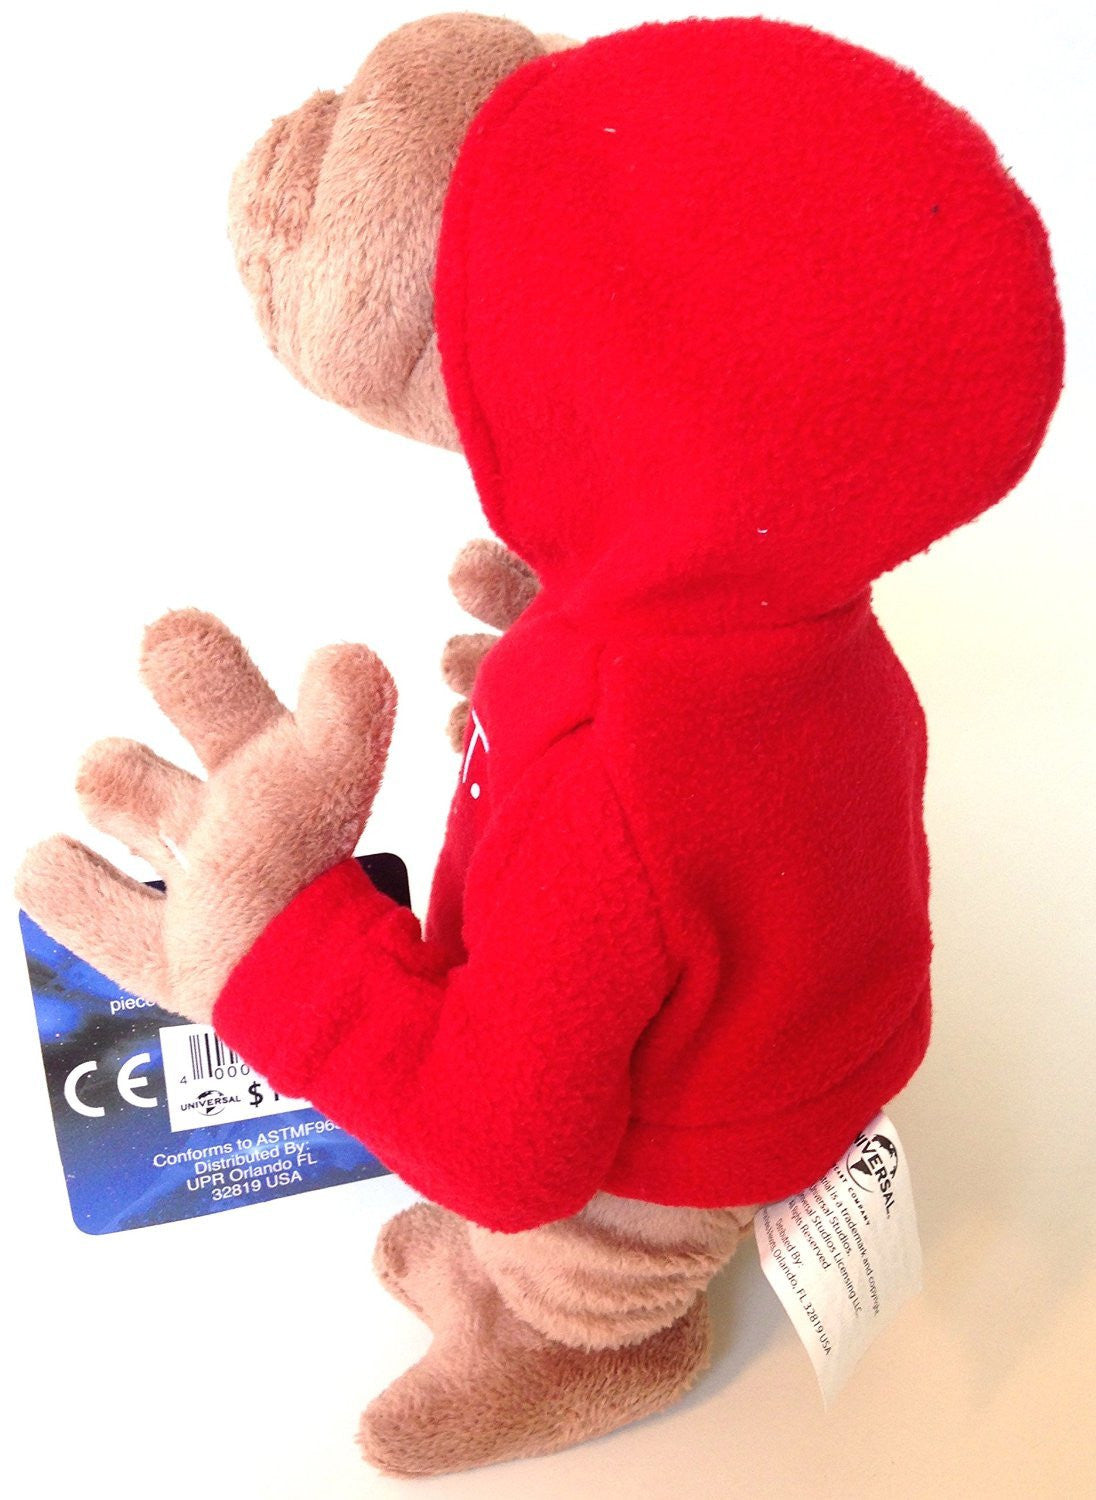 universal studios 9" E.T. extra terrestrial red sweatshirt plush toy new with tags